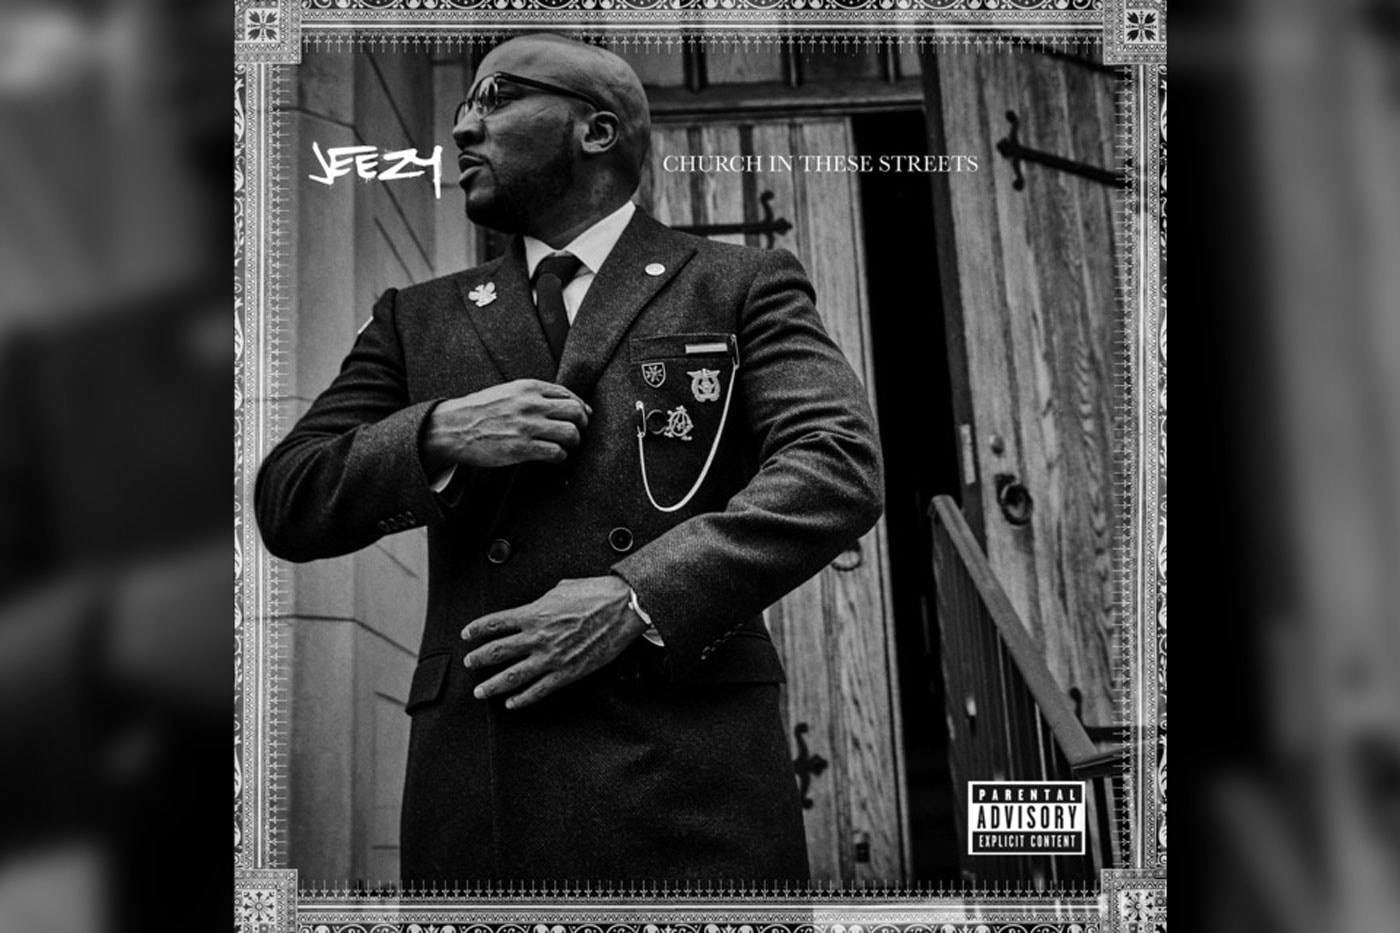 Jeezy featuring Janelle Monáe - Sweet Life